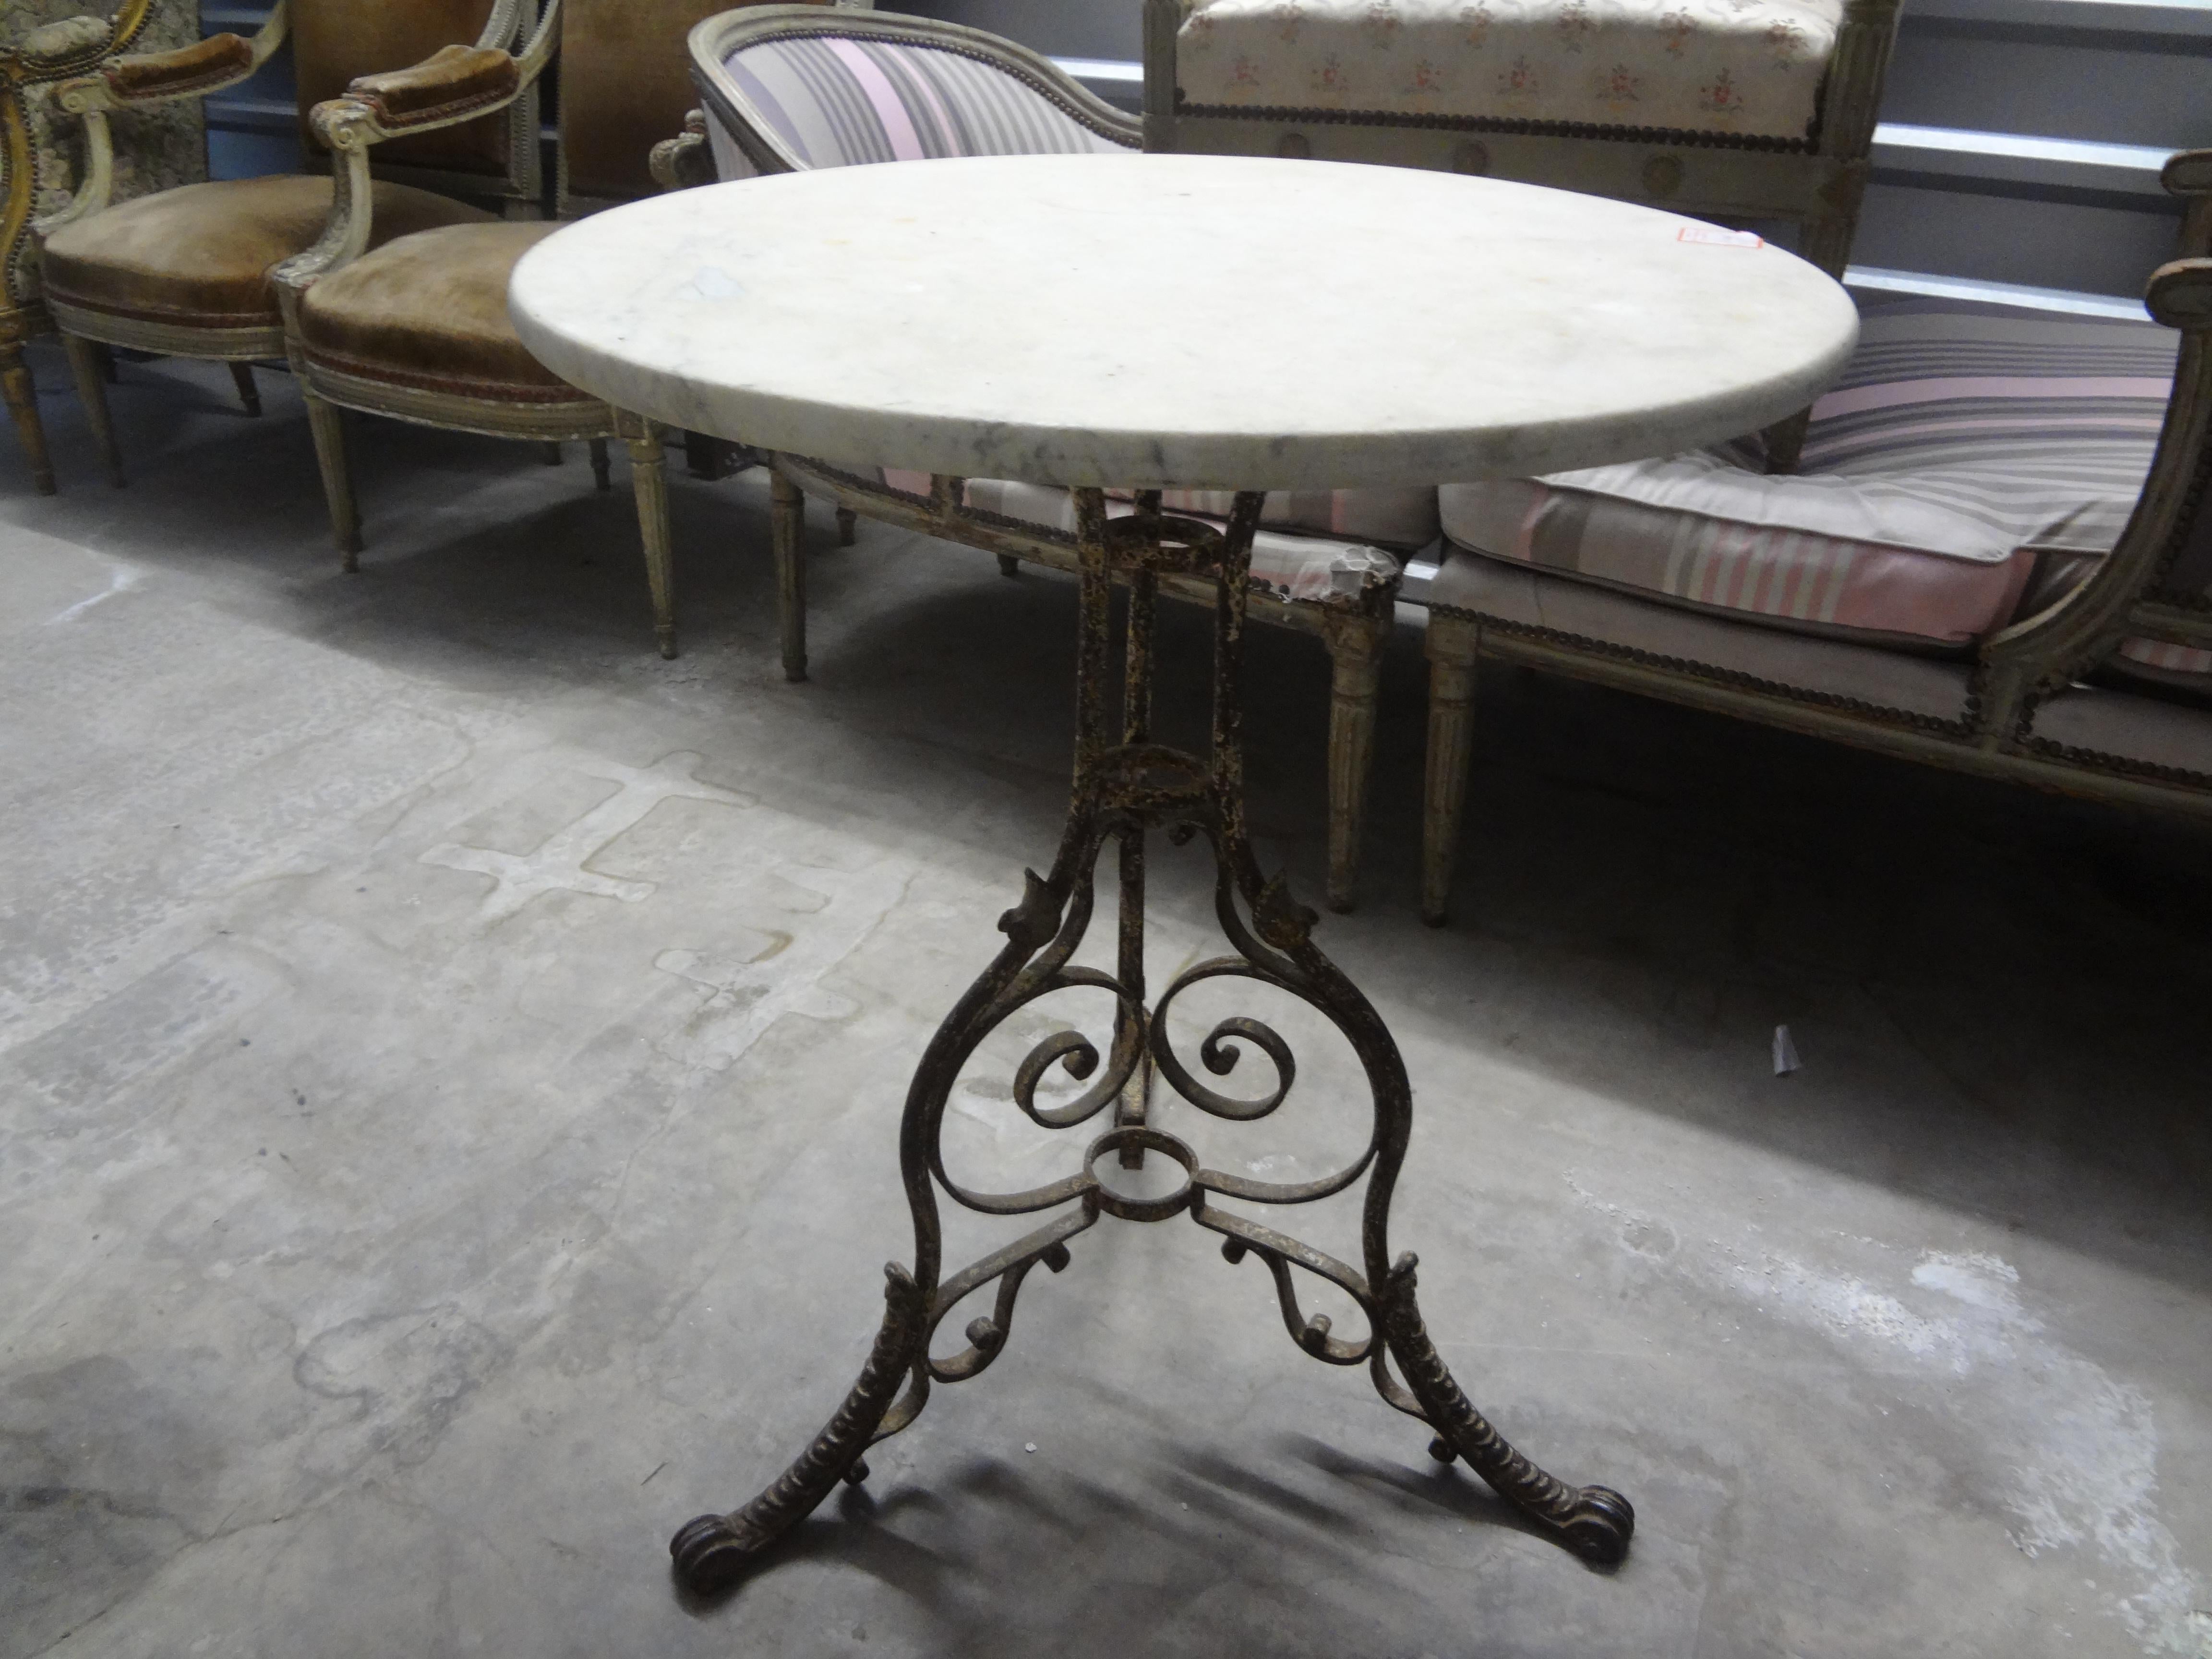 19th Century French Iron And Marble Garden Table.
Offered is a charming antique French iron garden table or bistro table with a Carrara marble top.
This beautiful table will work in outdoors in a garden setting or in many rooms indoors.
Great chippy